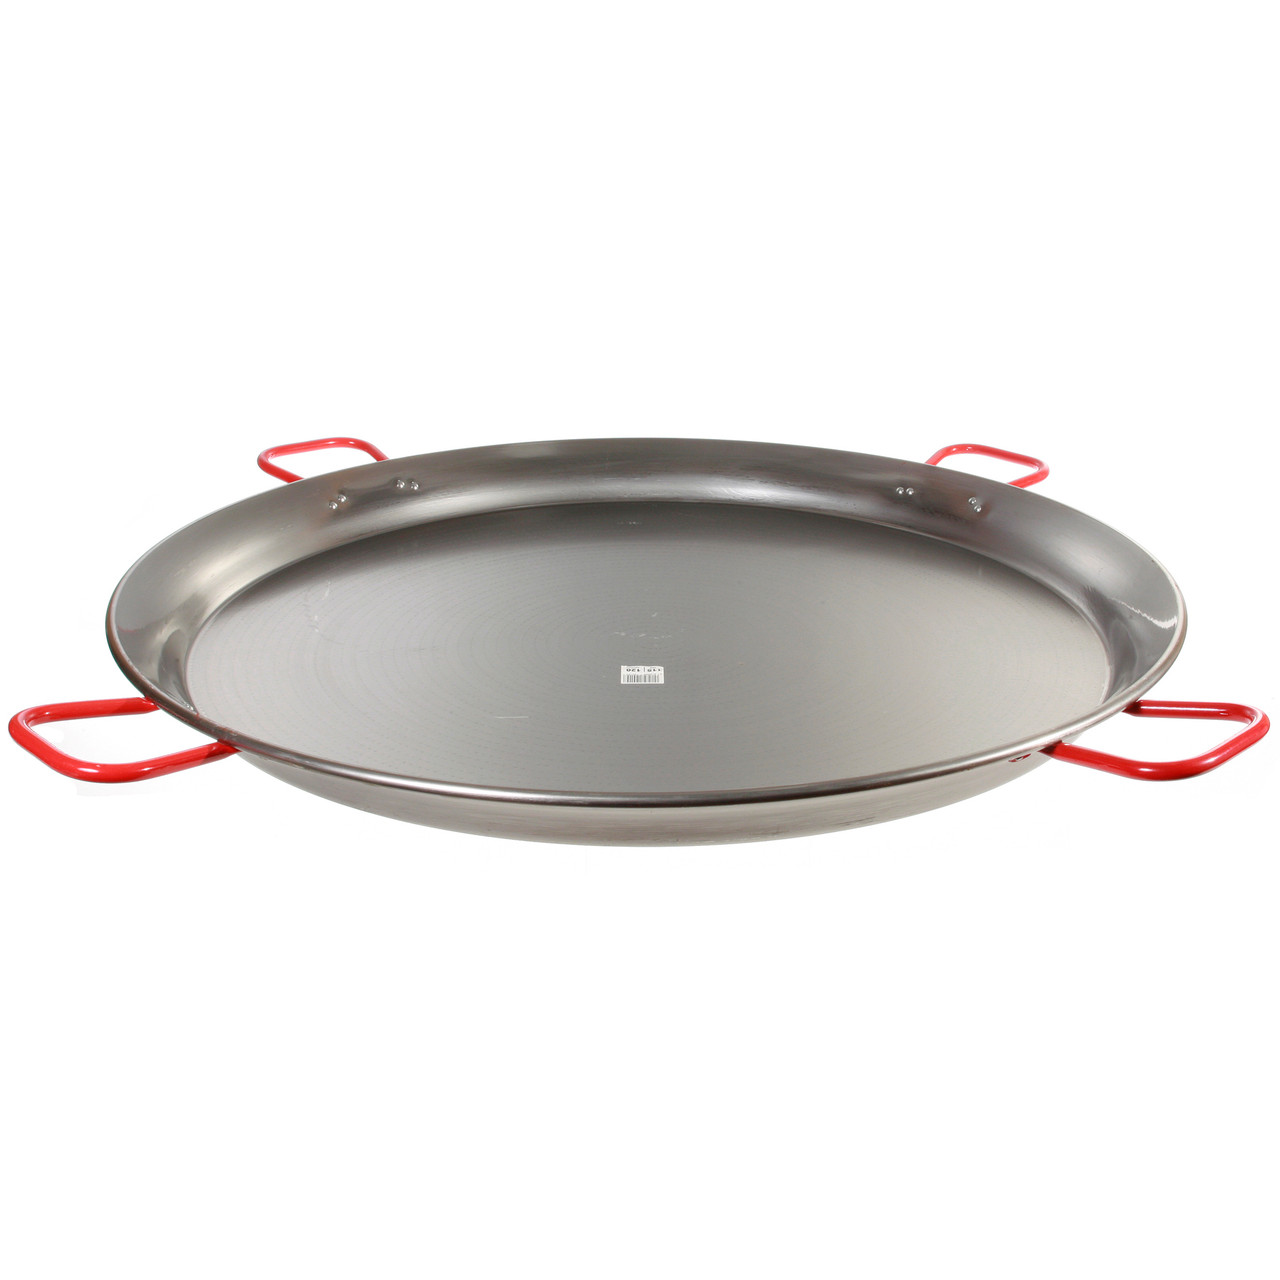 40cm Stainless Steel Induction Paella Pan for 9 ppl Paella induction